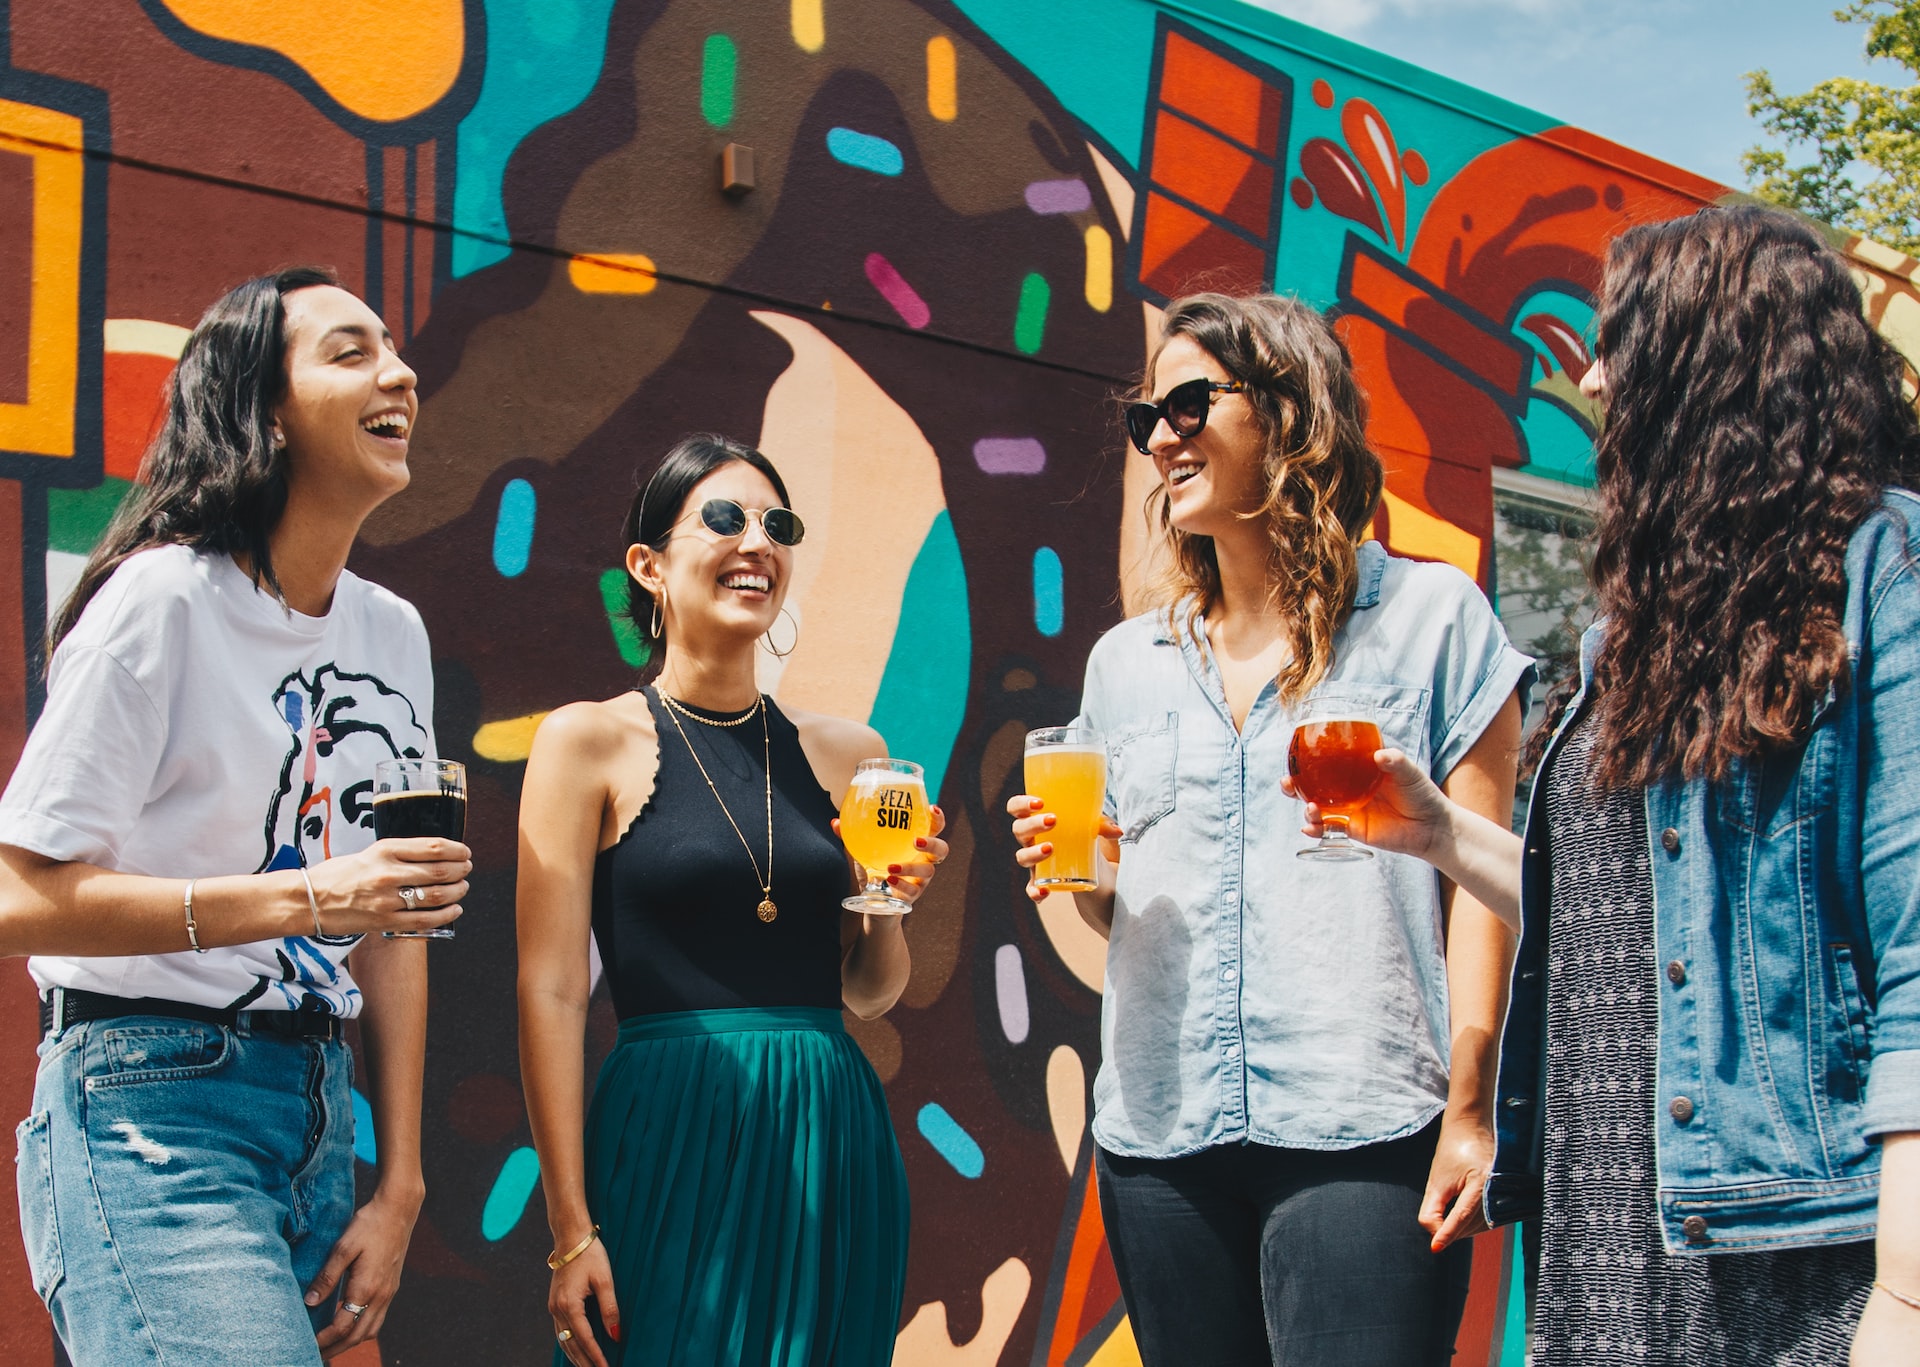 Four women standing around drinking beer in front of a wall painted with graffiti.